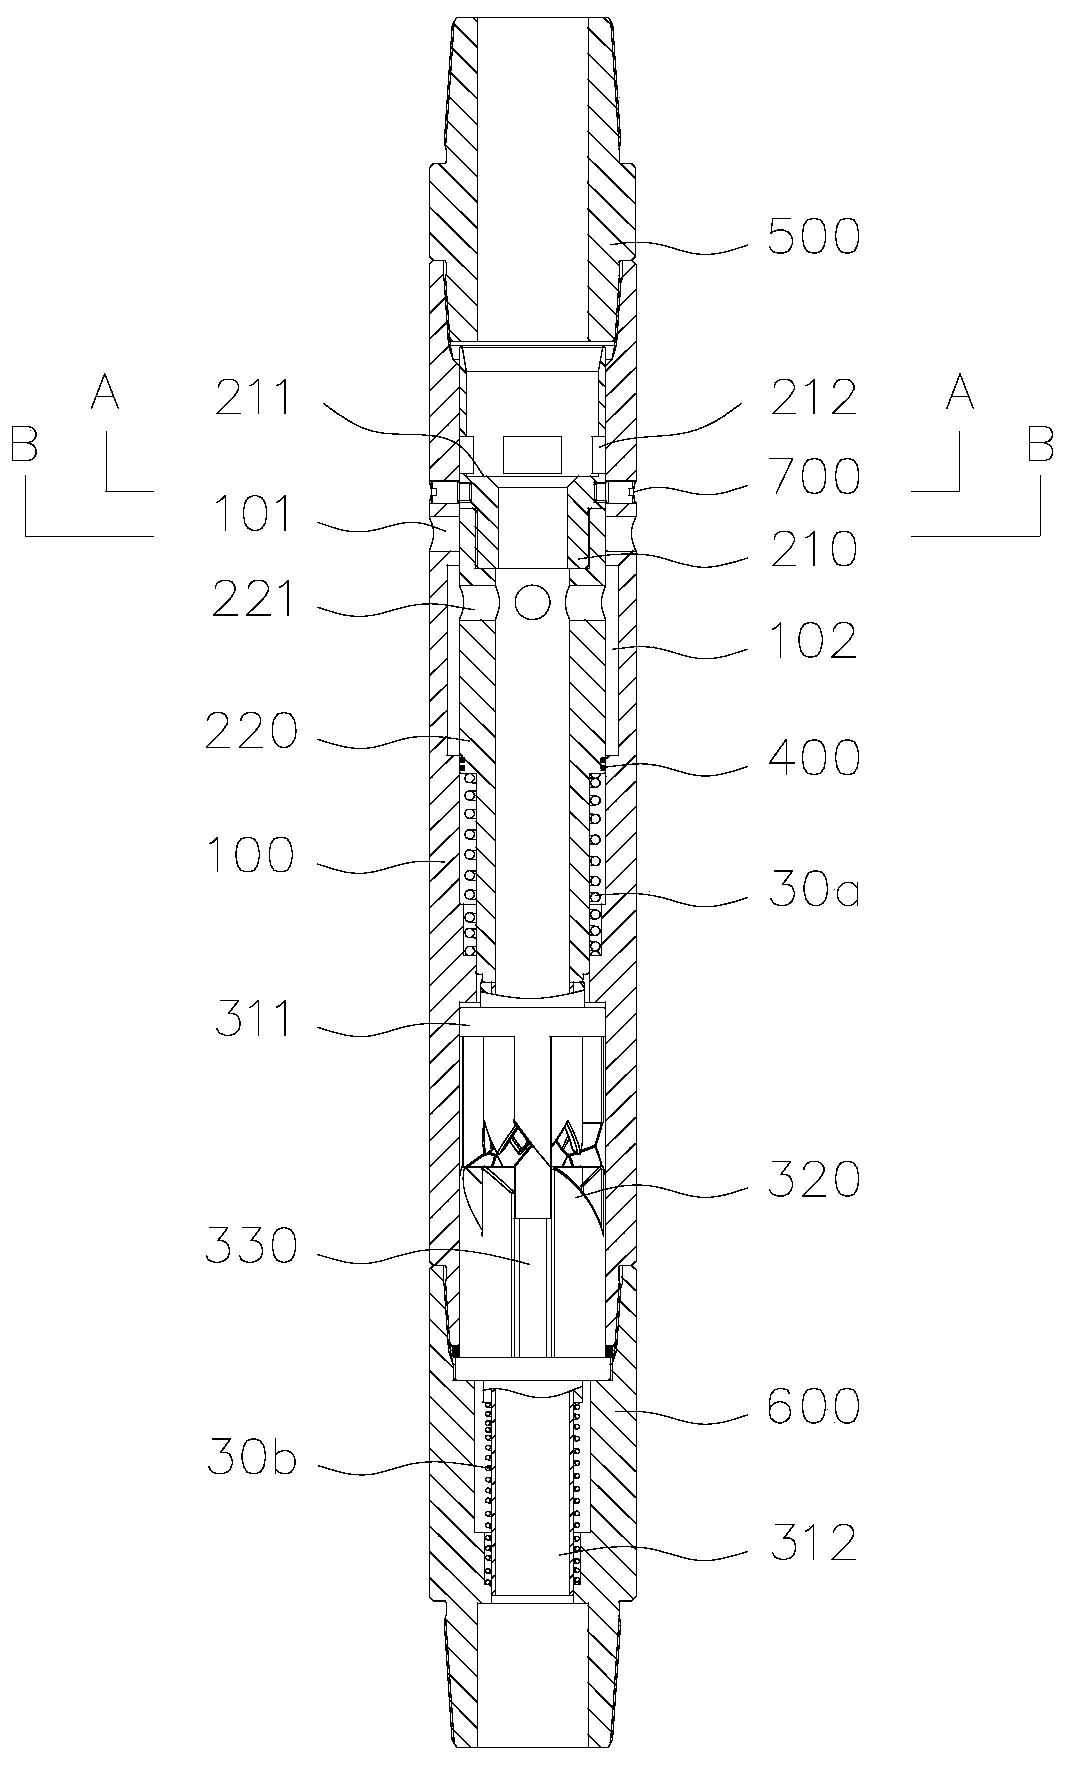 Repeatable bypass valve